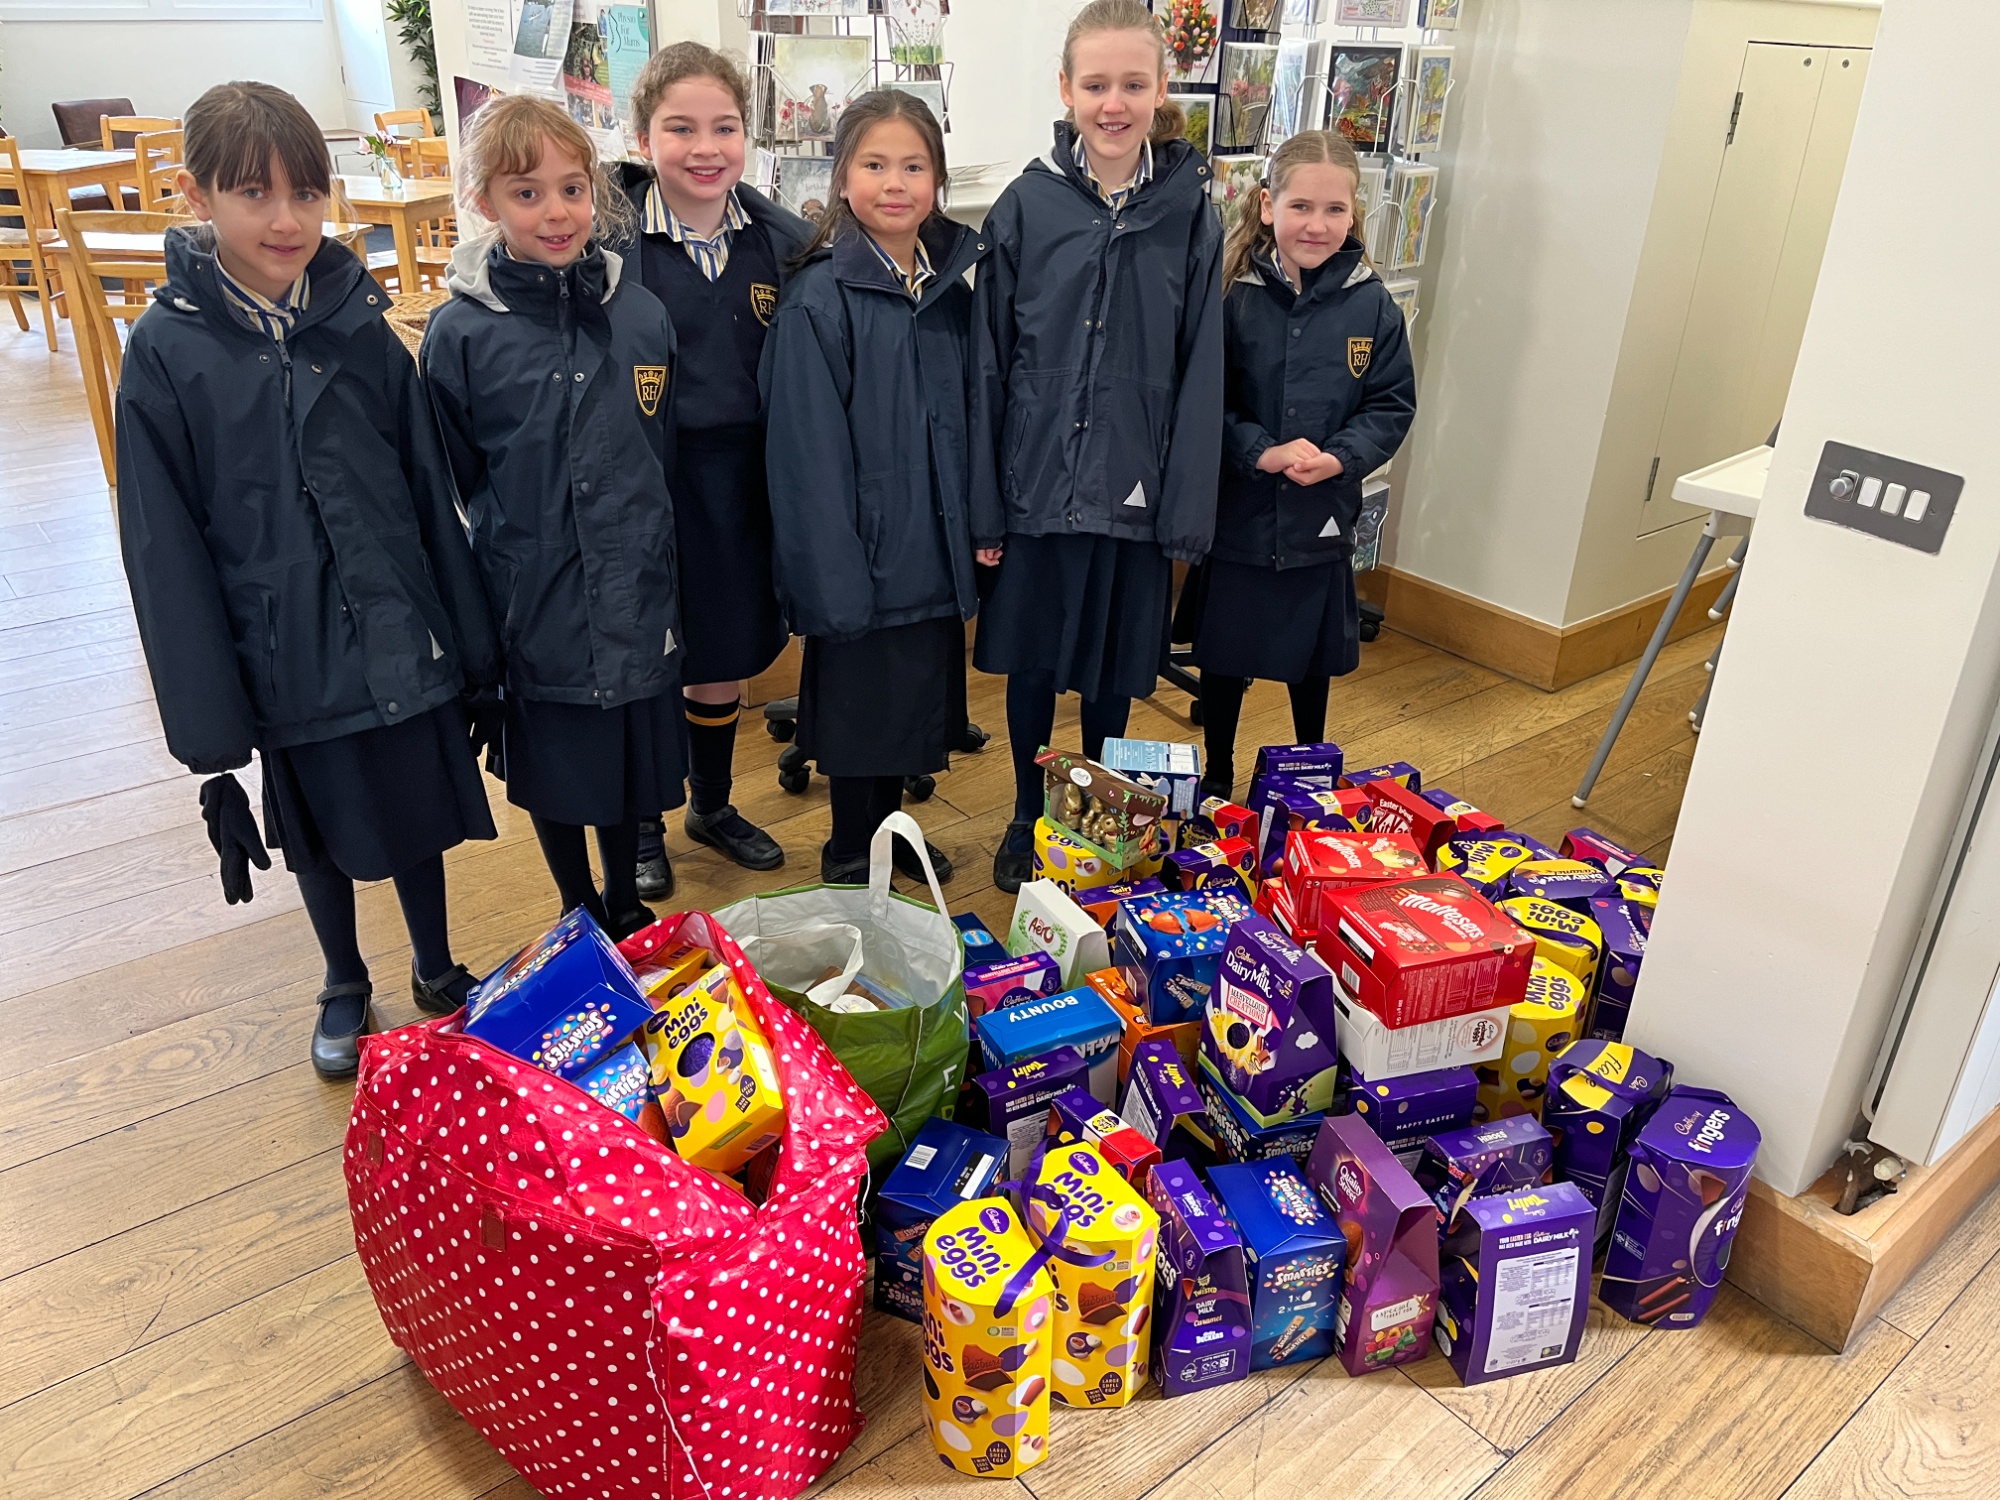 Easter egg donations to local foodbank